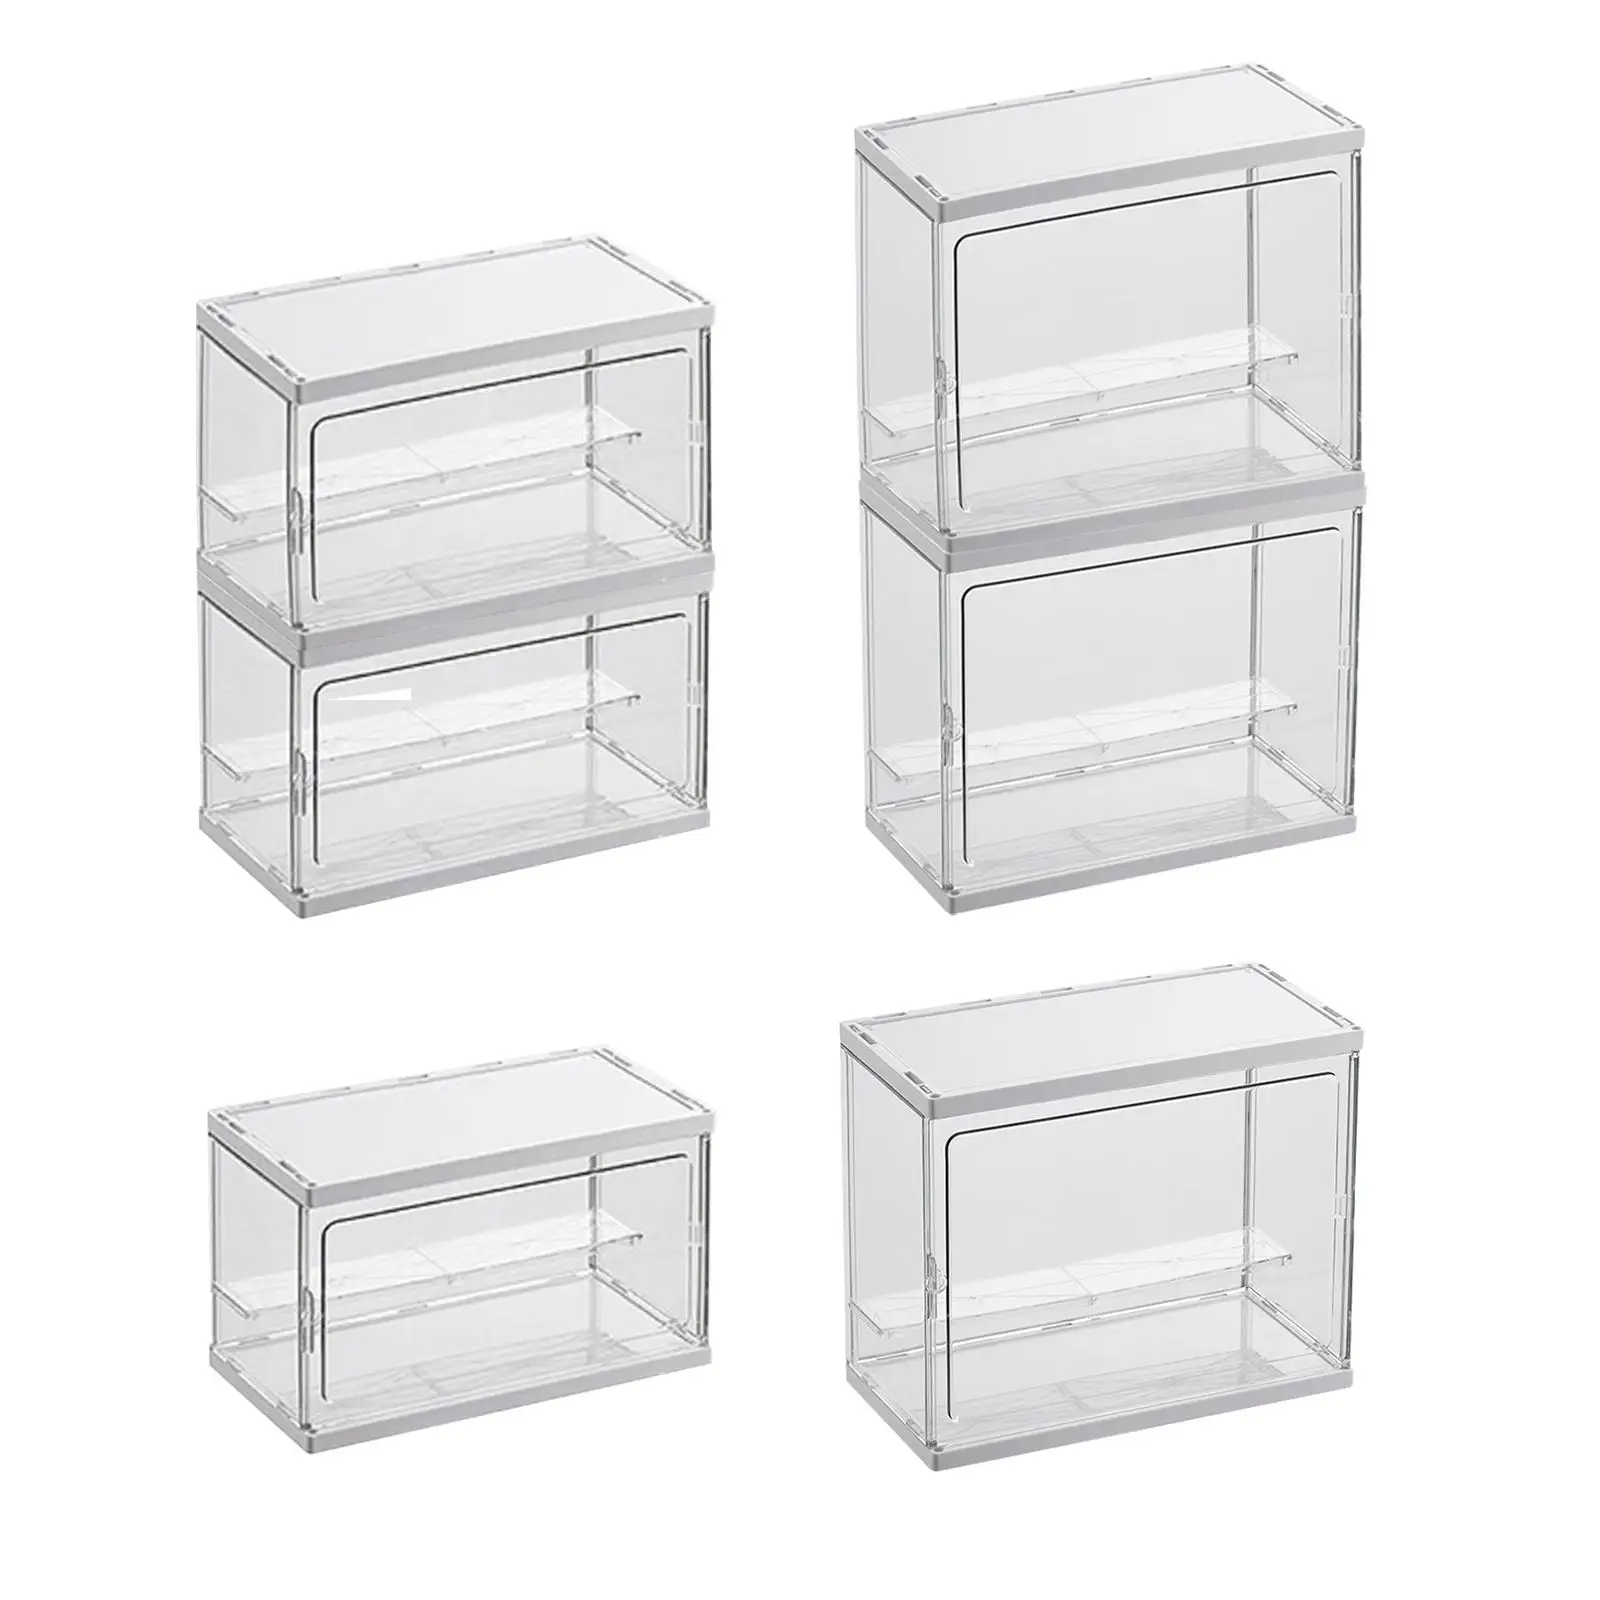 Display Case Showcase Stand Dustproof for Action Figures Toy Collectibles Model Car